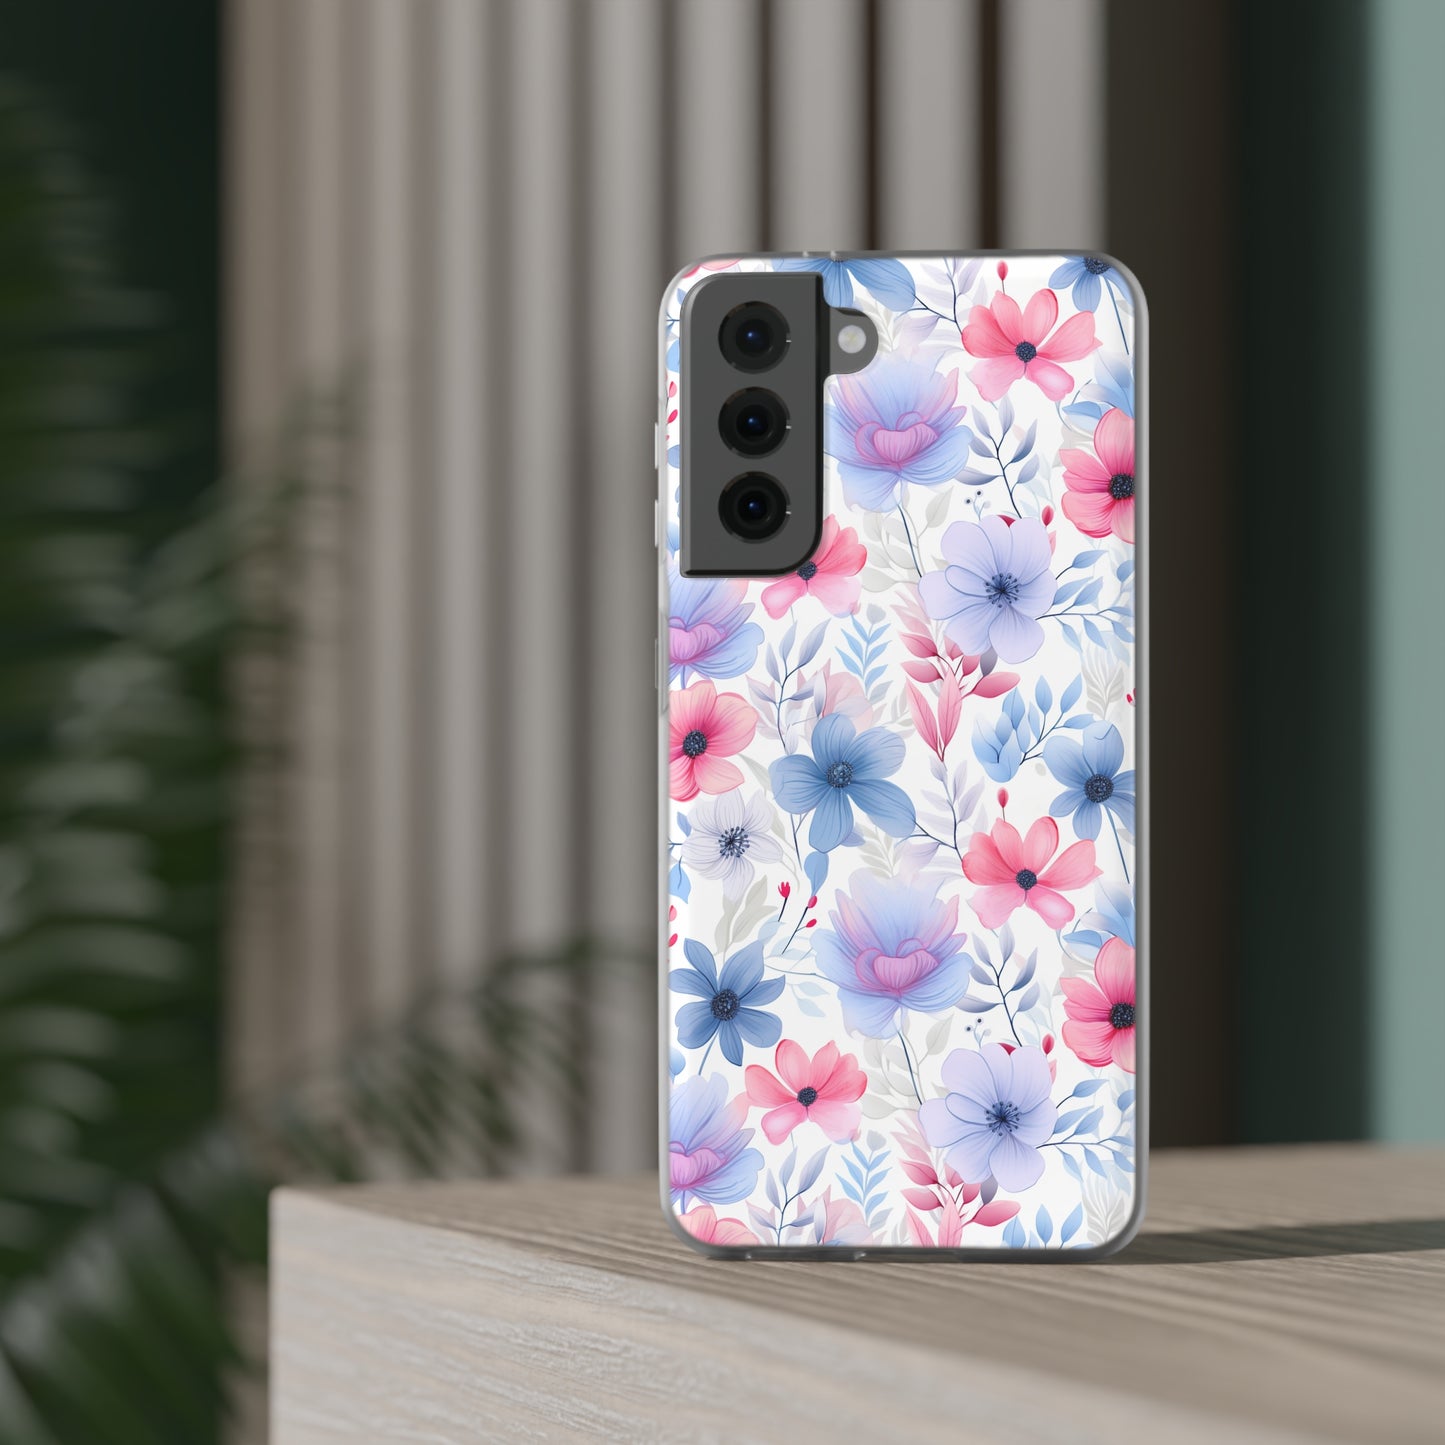 Floral Whispers - Soft Hues of Violets, Pinks, and Blues - Flexi Phone Case Phone Case Pattern Symphony Samsung Galaxy S21 with gift packaging  